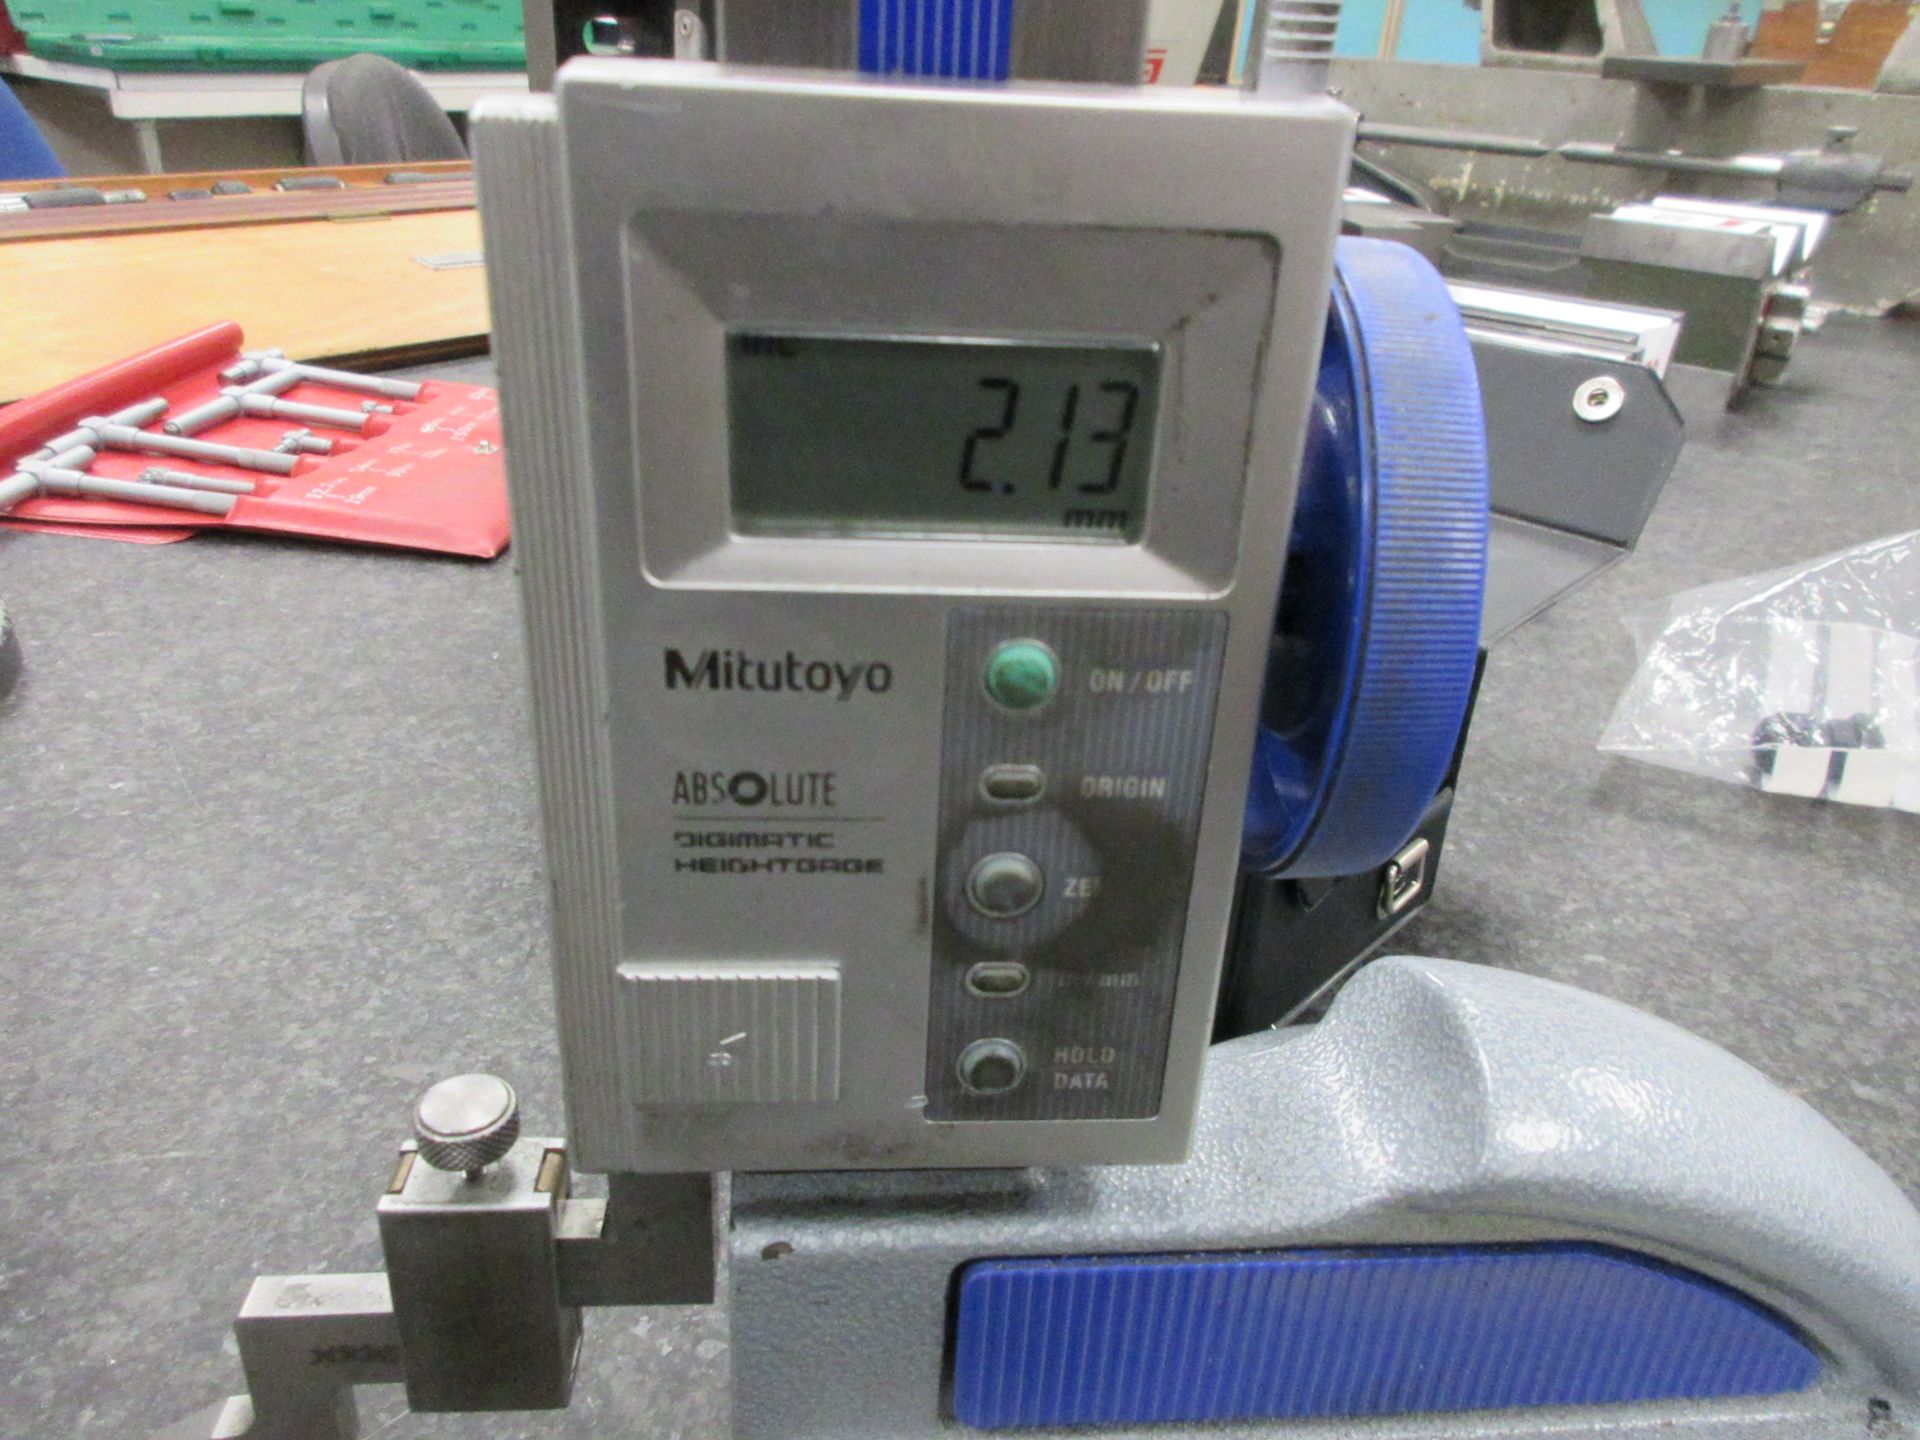 Mitutoyo Absolute Digmatic height gauge - Image 2 of 3